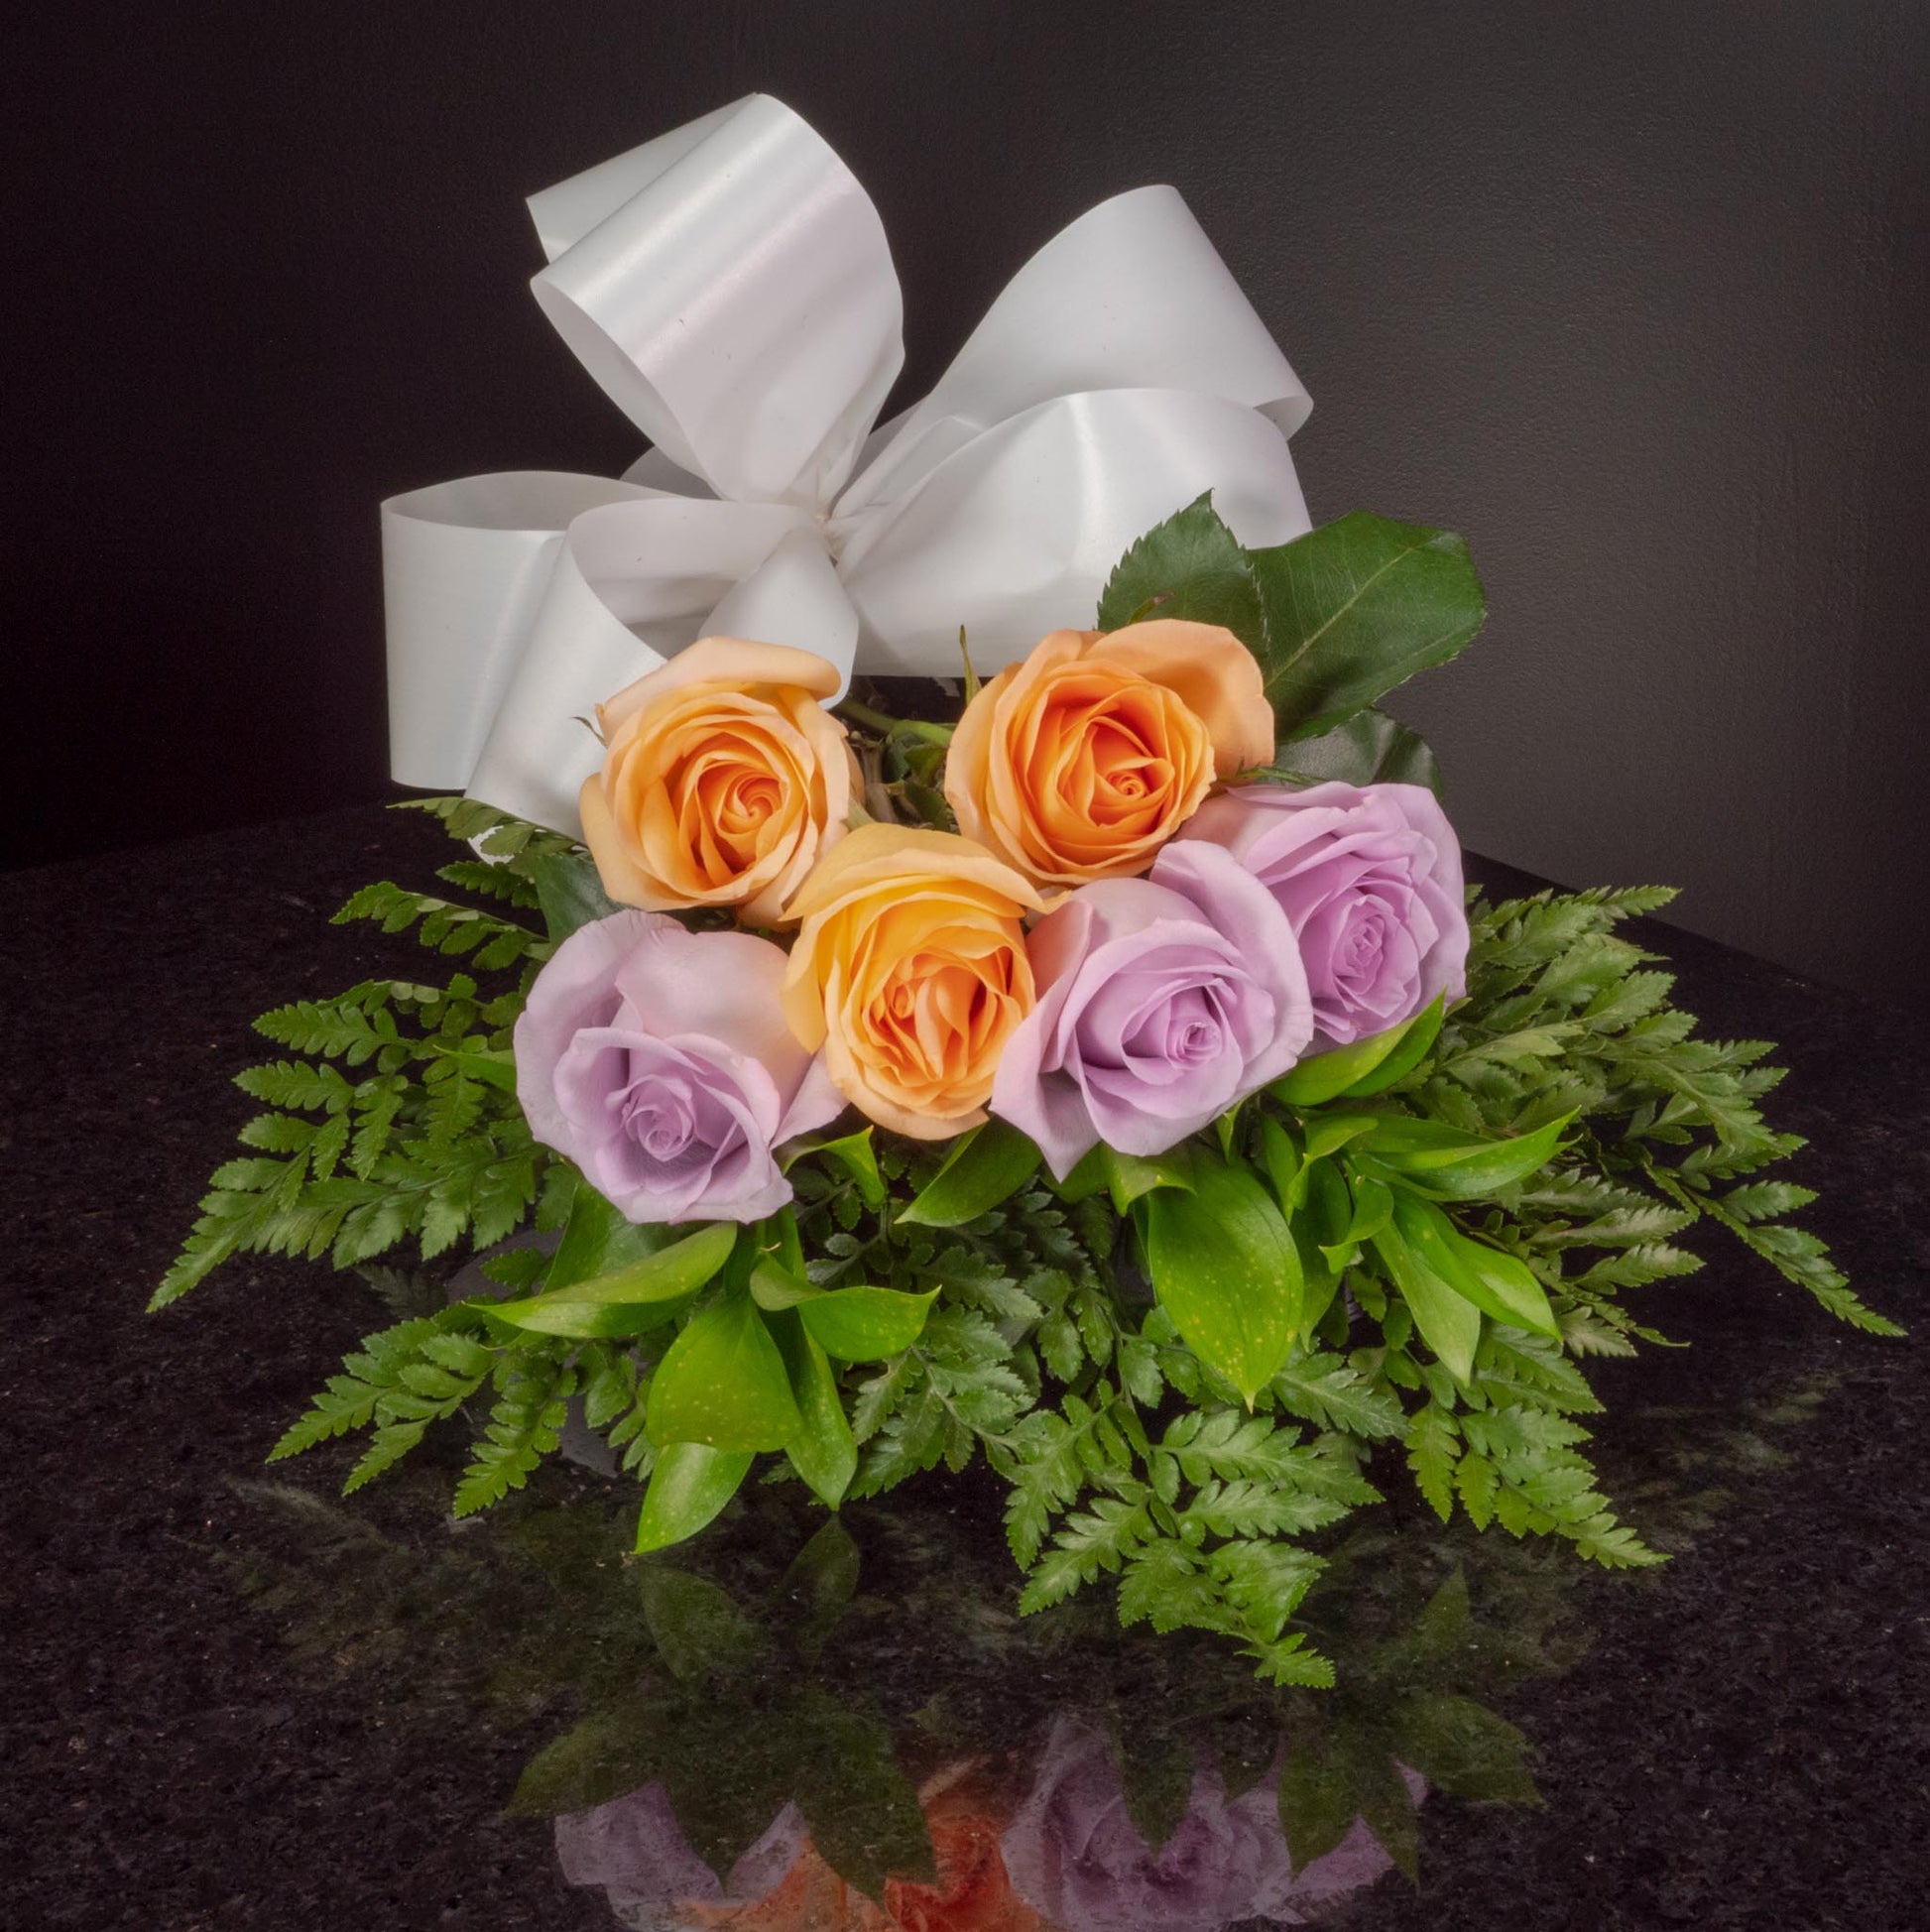 Peach Lavender Roses 6 Roses / Hand-Tied / Basic